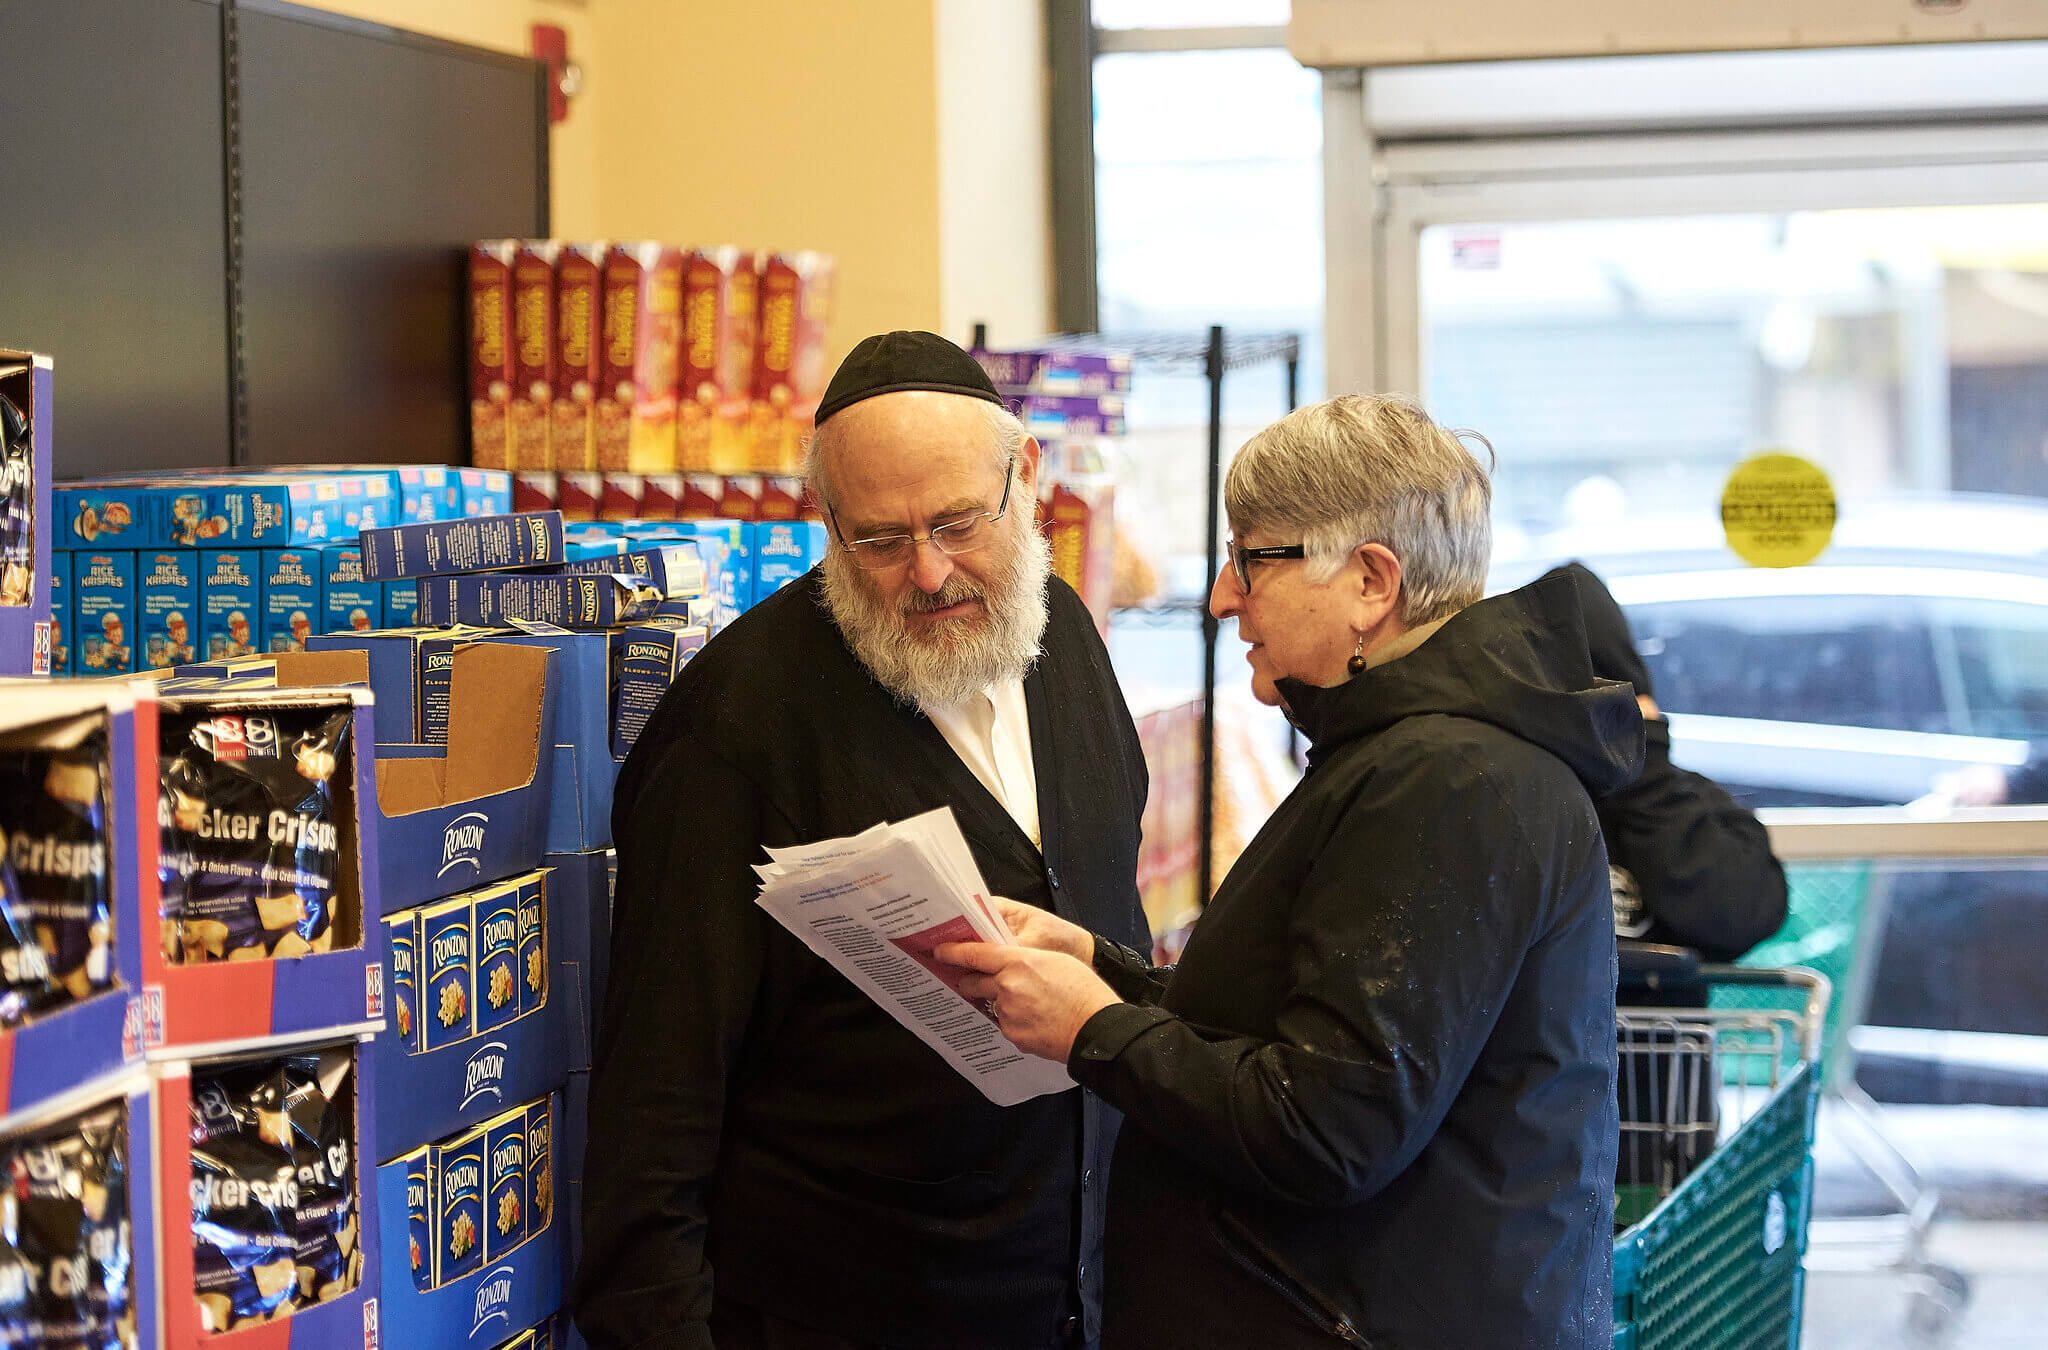 A volunteer with Jews For Racial and Economic Justice speaks about community safety at a New York grocery store in February 2020. The group asked lawmakers this week not to expand the Nonprofit Security Grant Program.